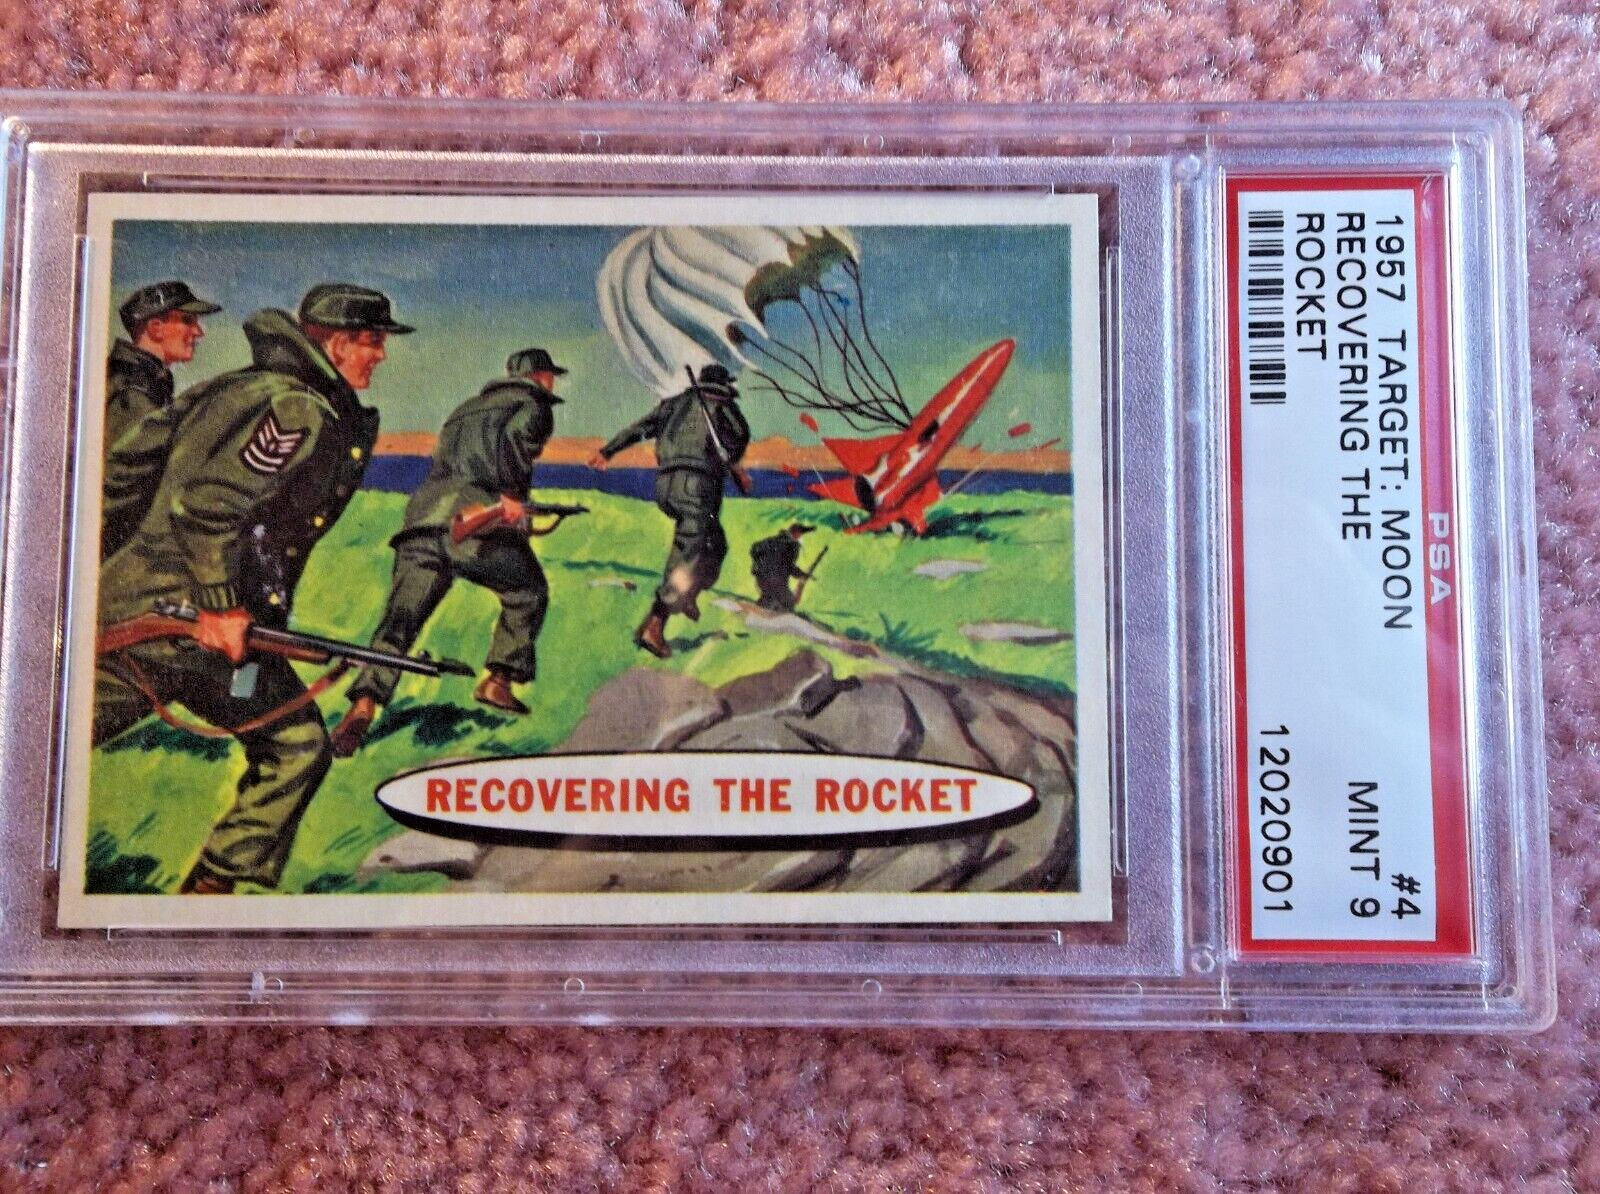 1957 TOPPS Target Moon # 4 RECOVERING THE ROCKET PSA 9 MINT RARE 1 OF ONLY 5